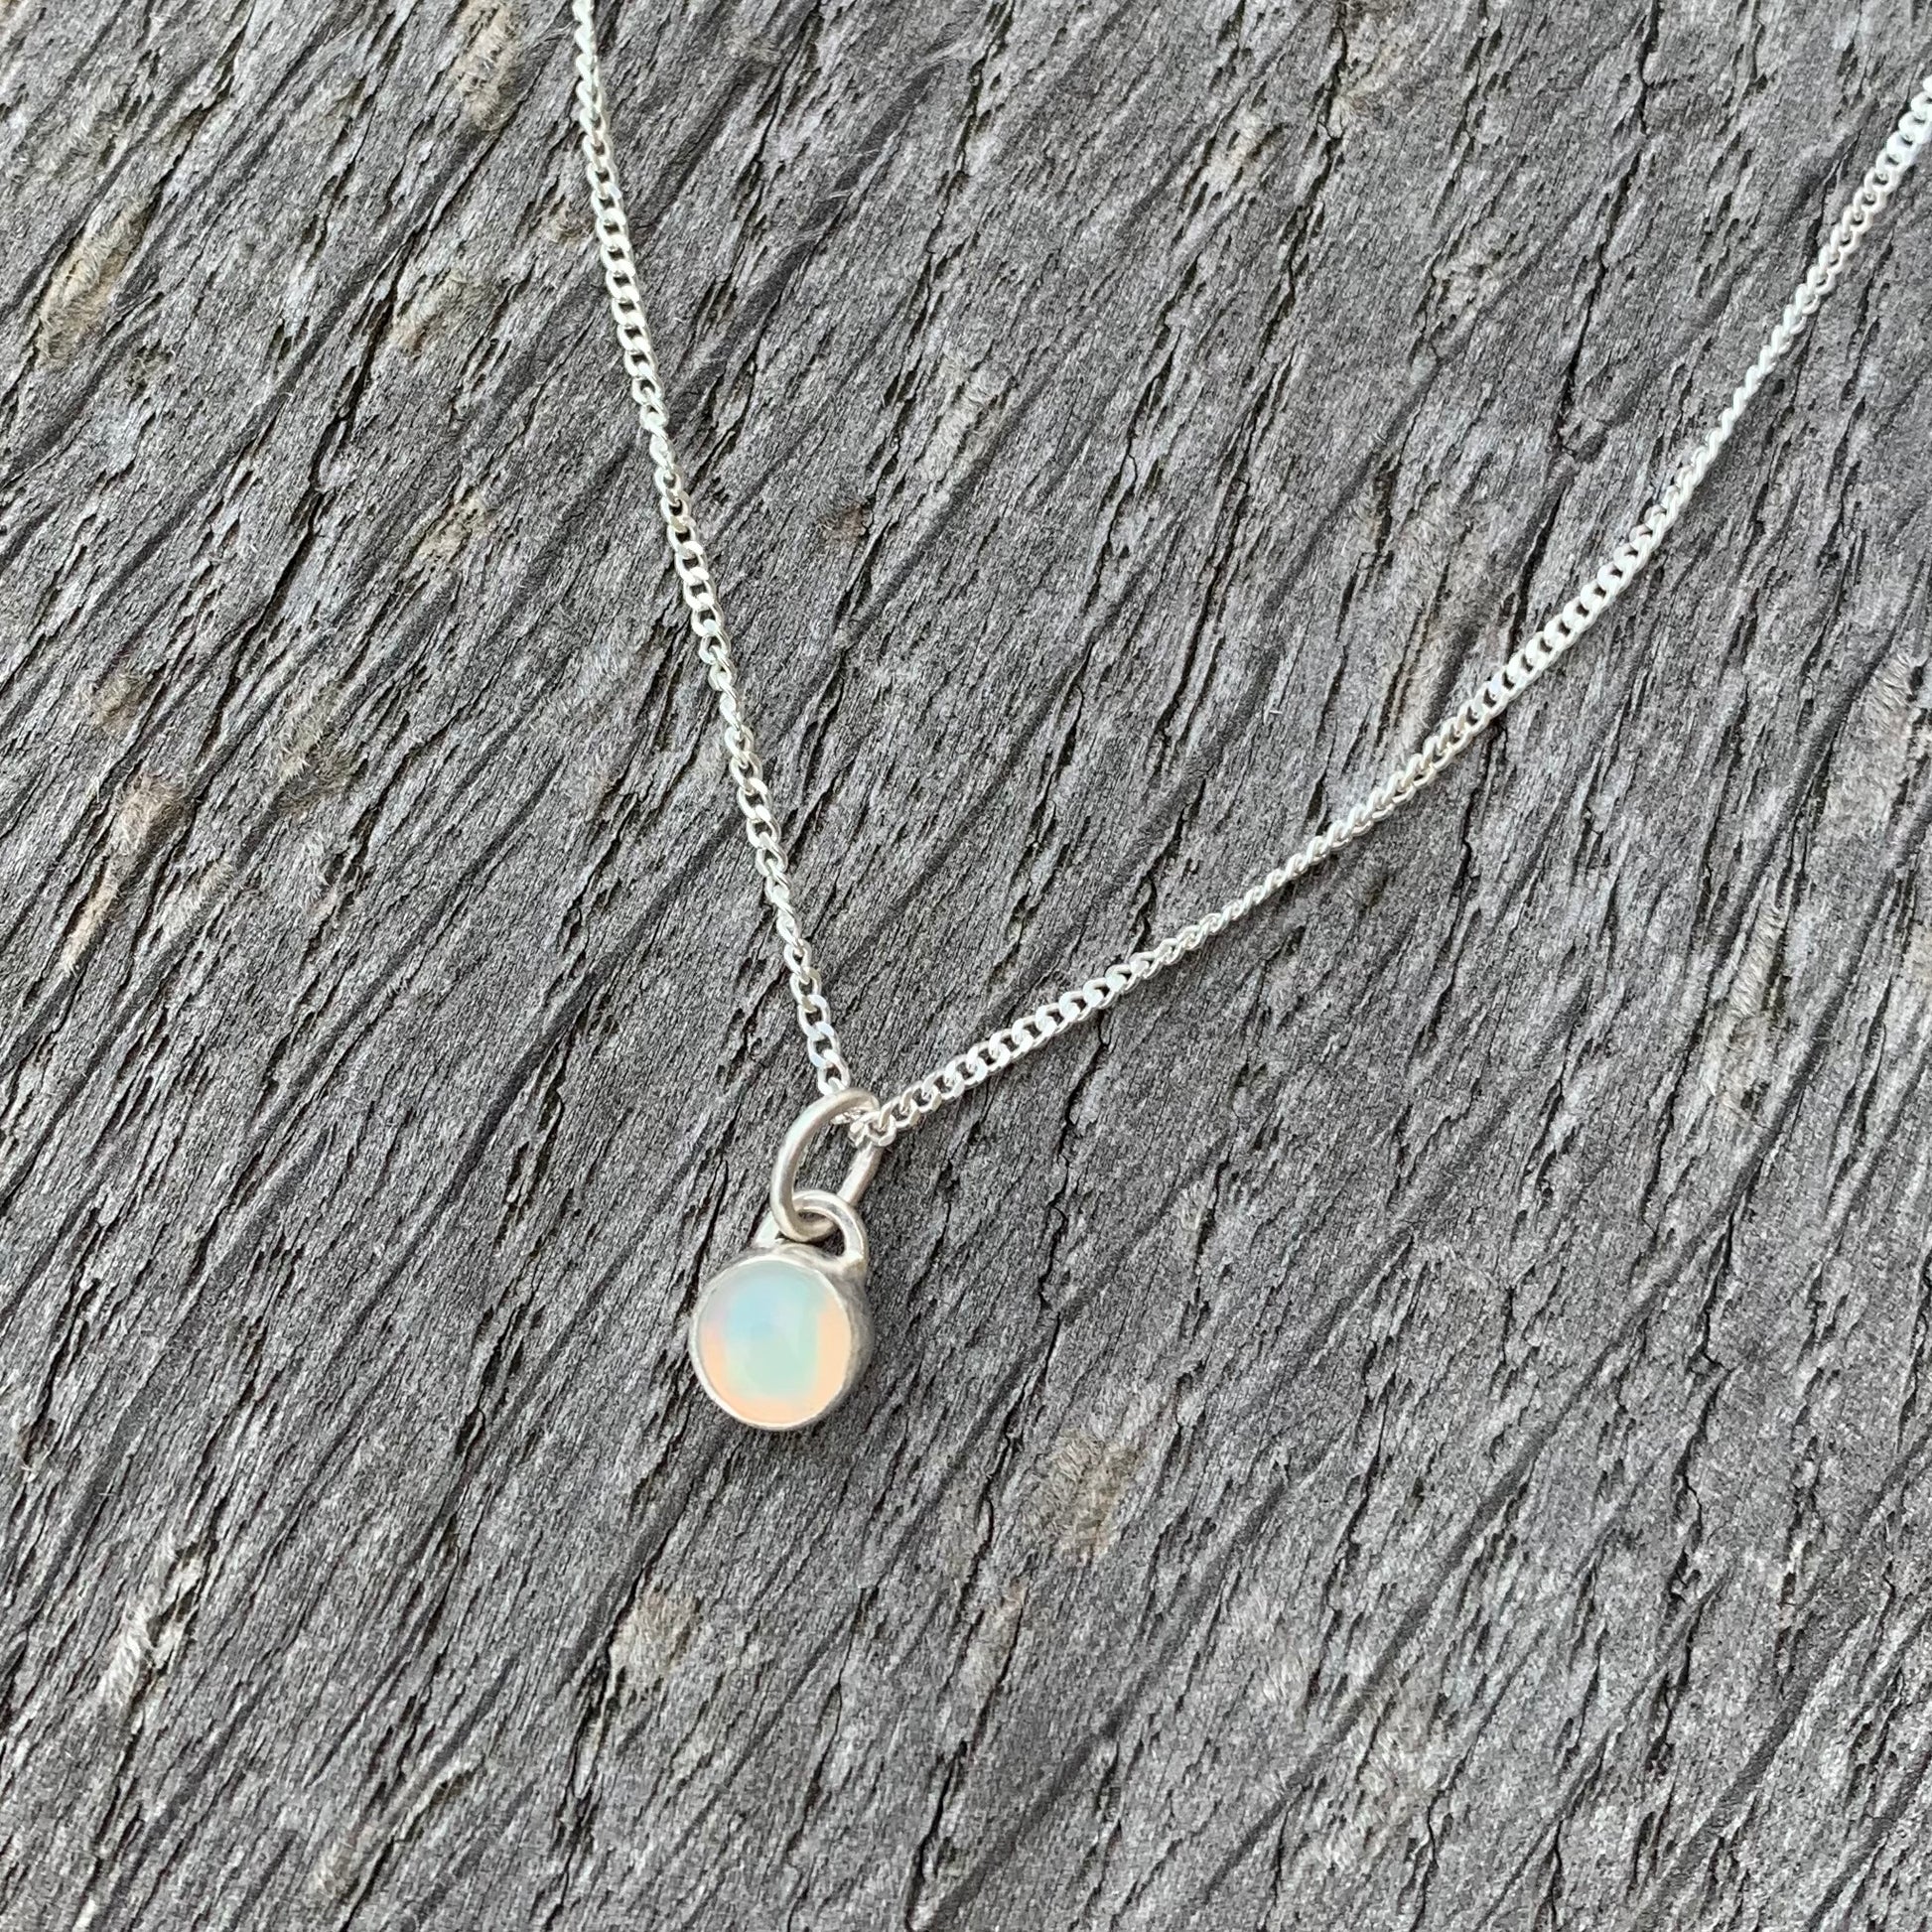 A rainbow opal stone set in silver on a sterling silver chain.